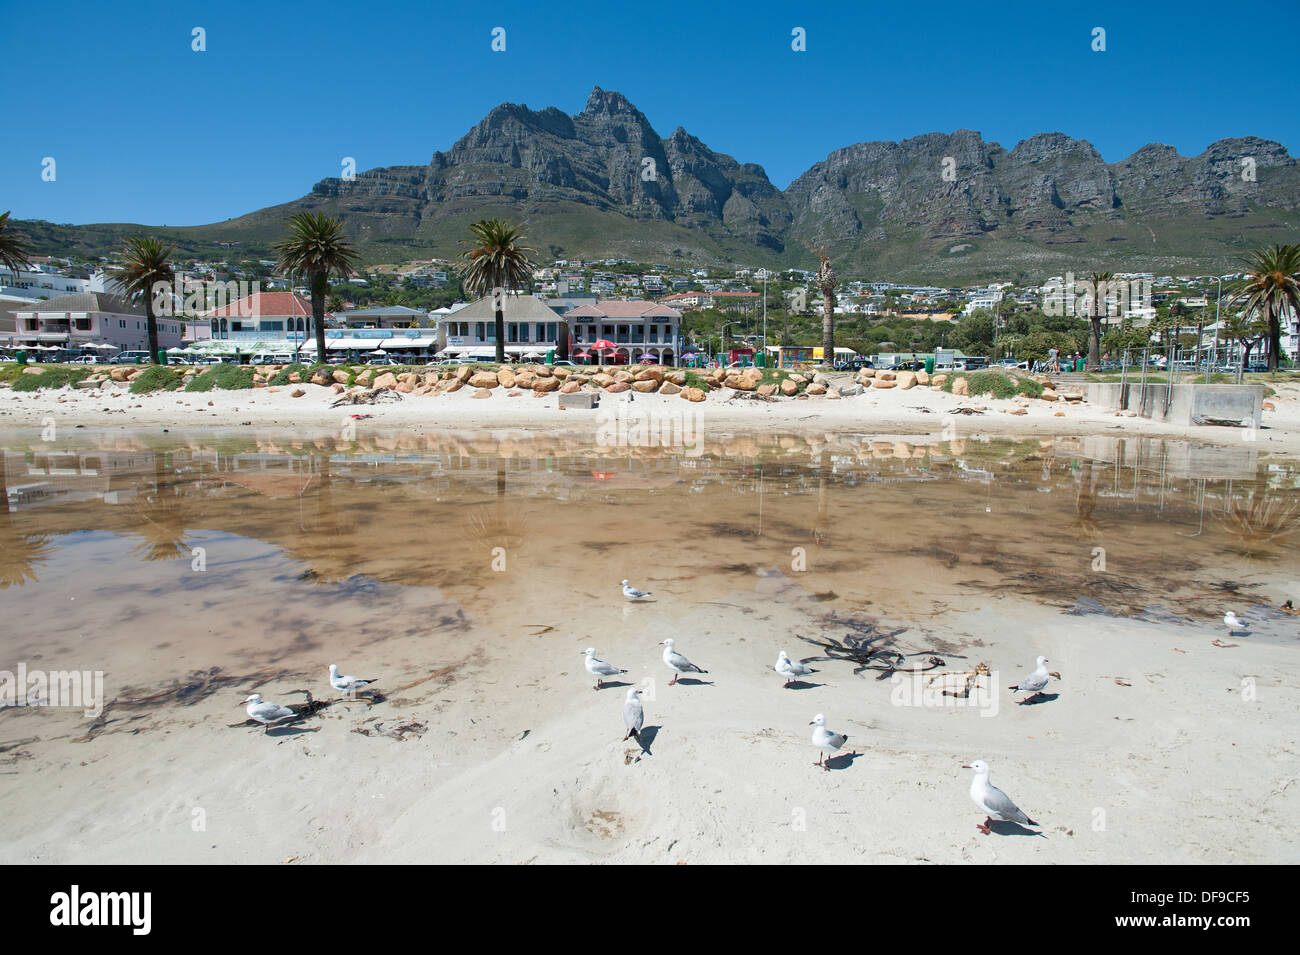 Sea gulls on the beach of Camps Bay, Twelve Apostles mountains in the background, Cape Town, South Africa Stock Photo